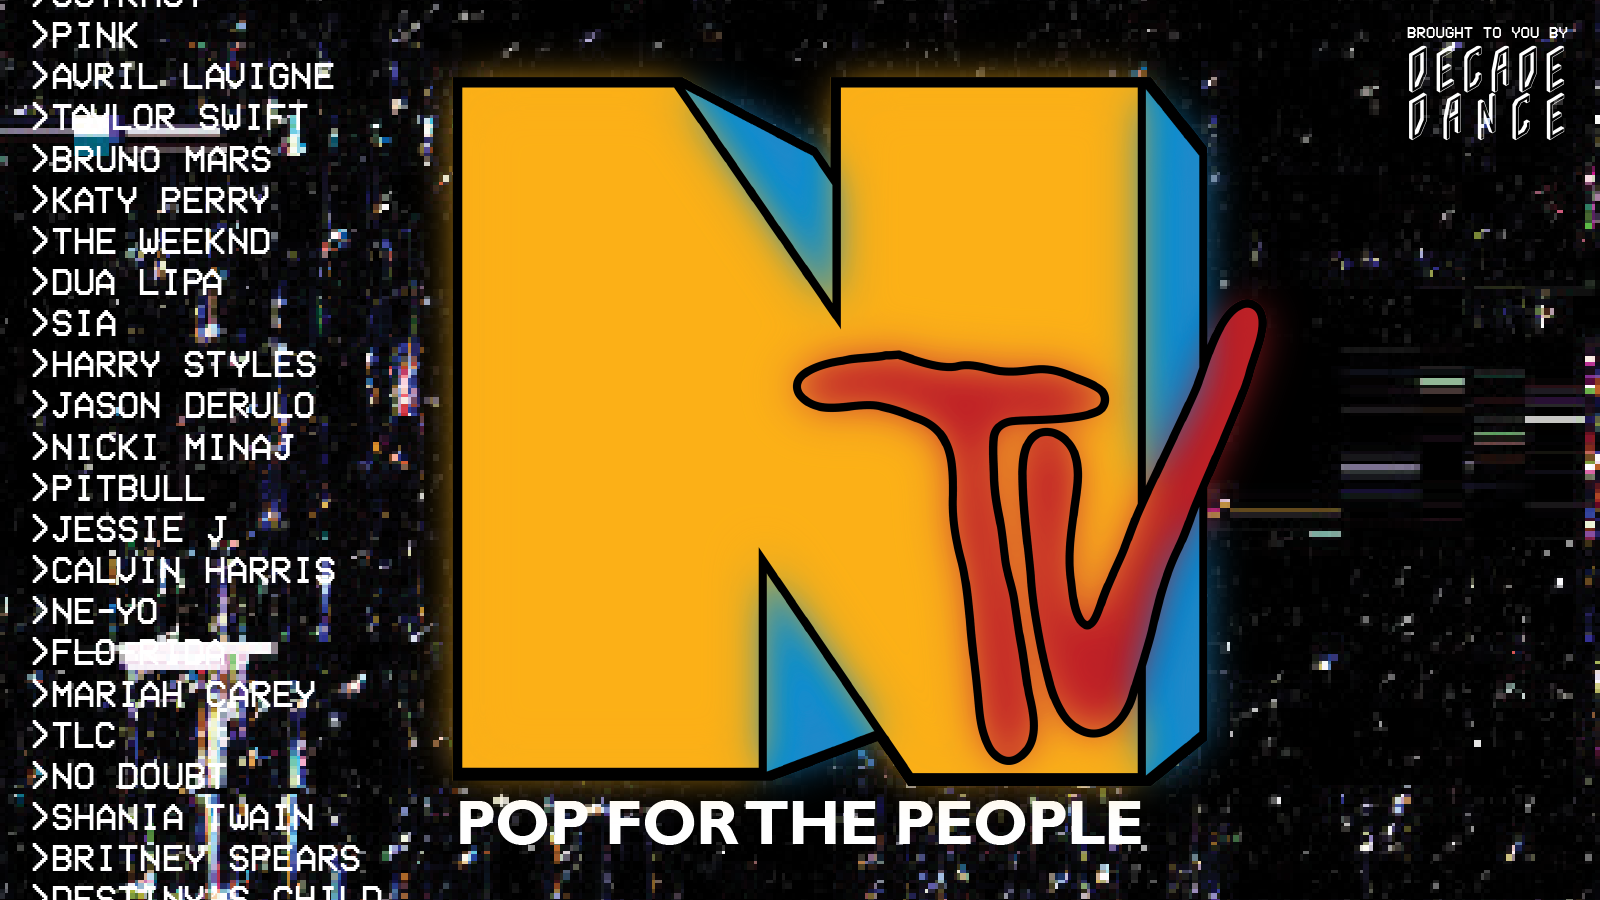 NTV – Pop For The People